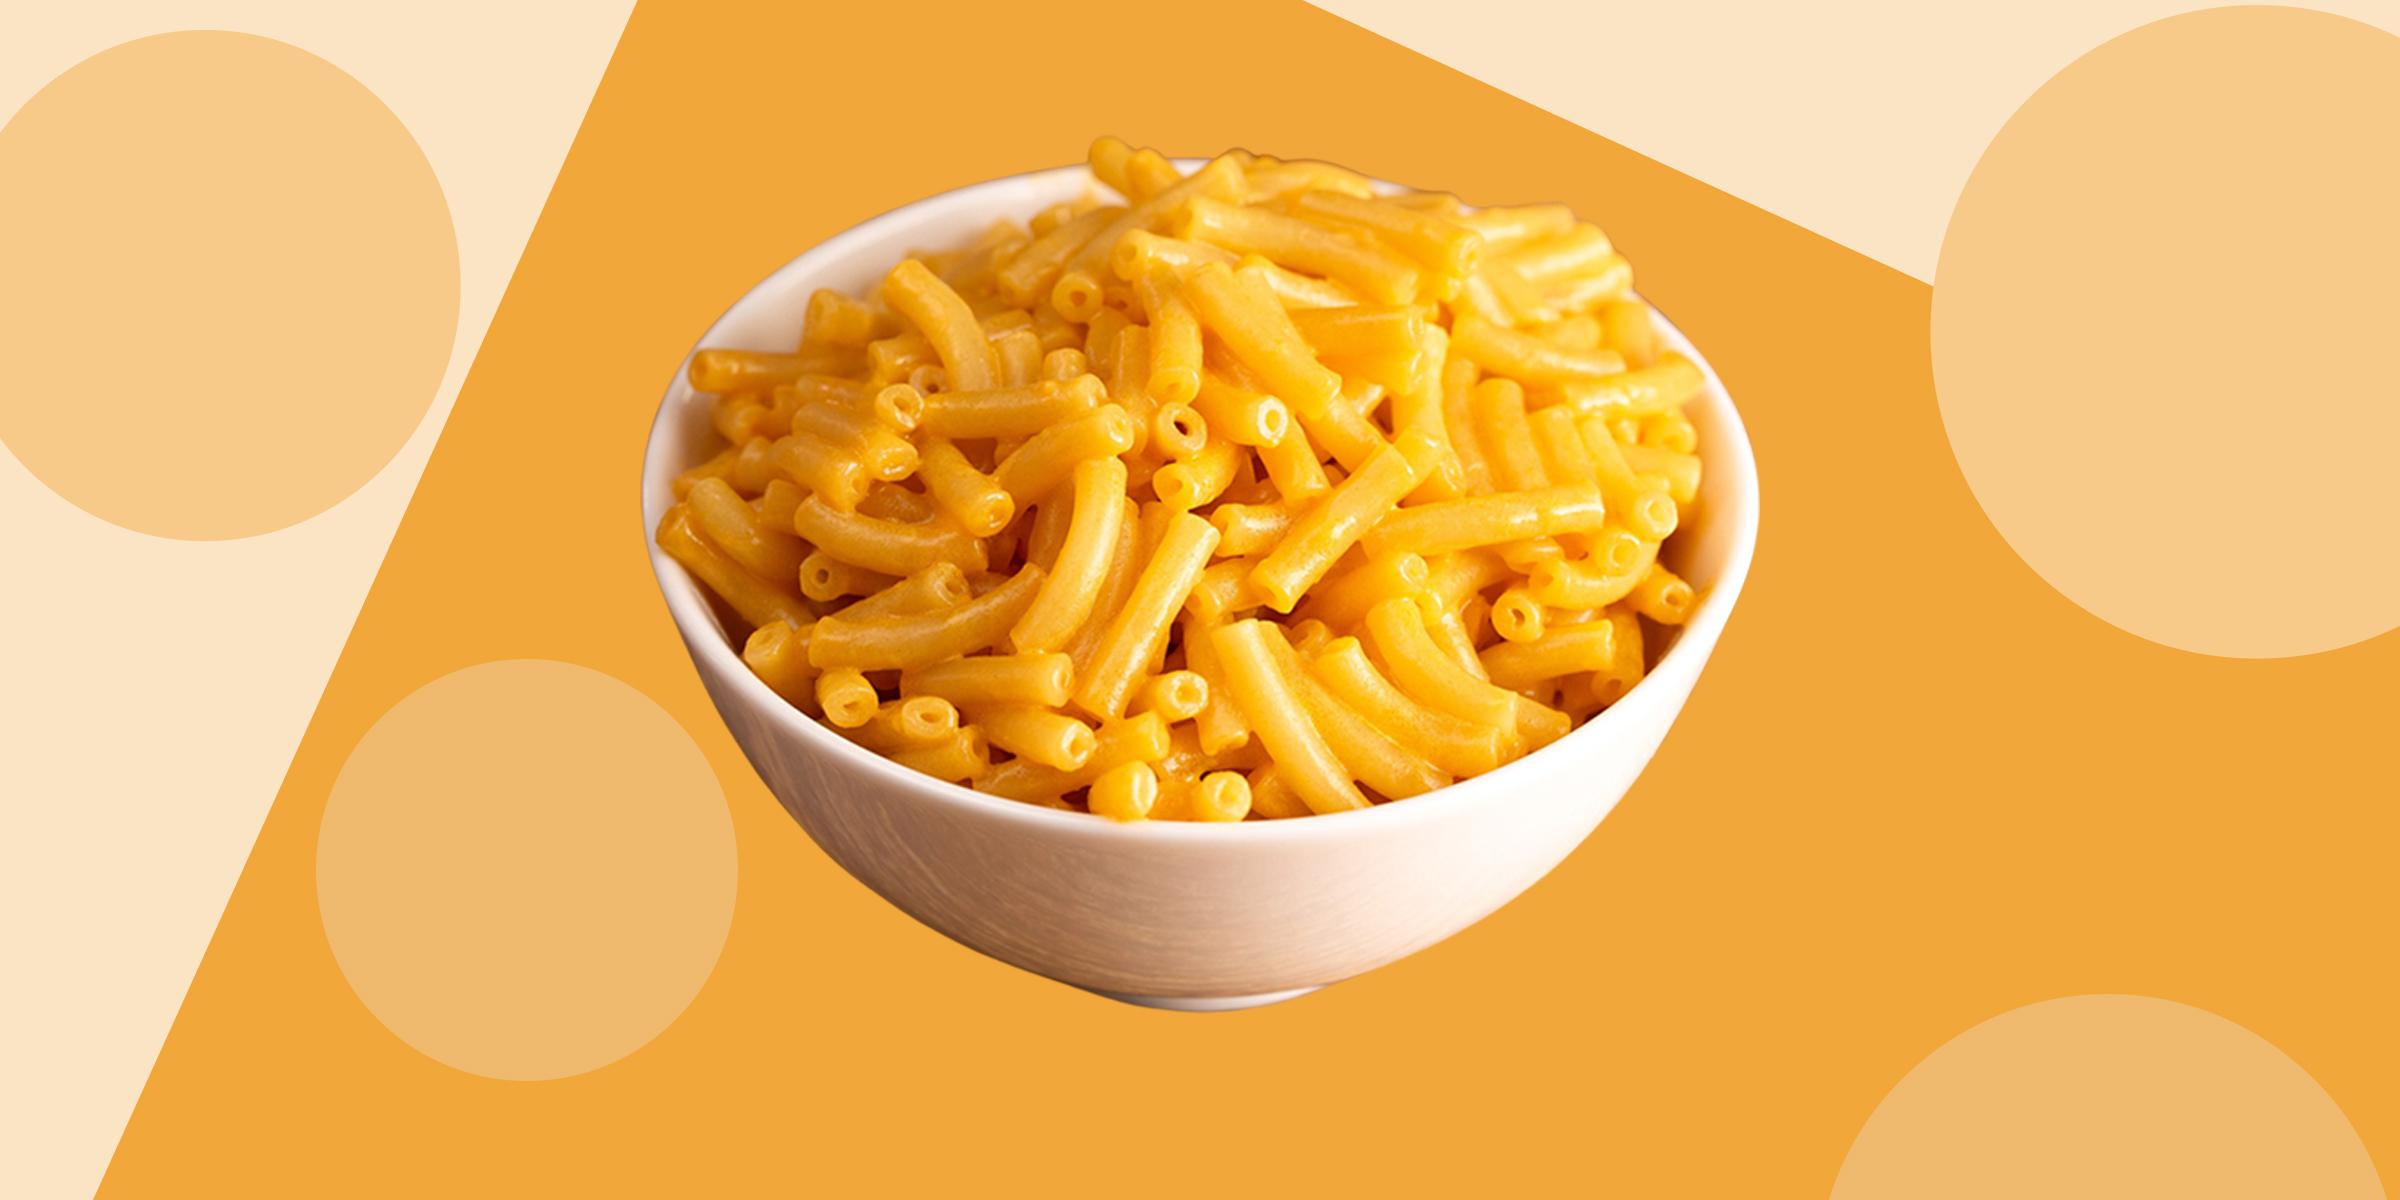 How do you get mac and cheese to stick together